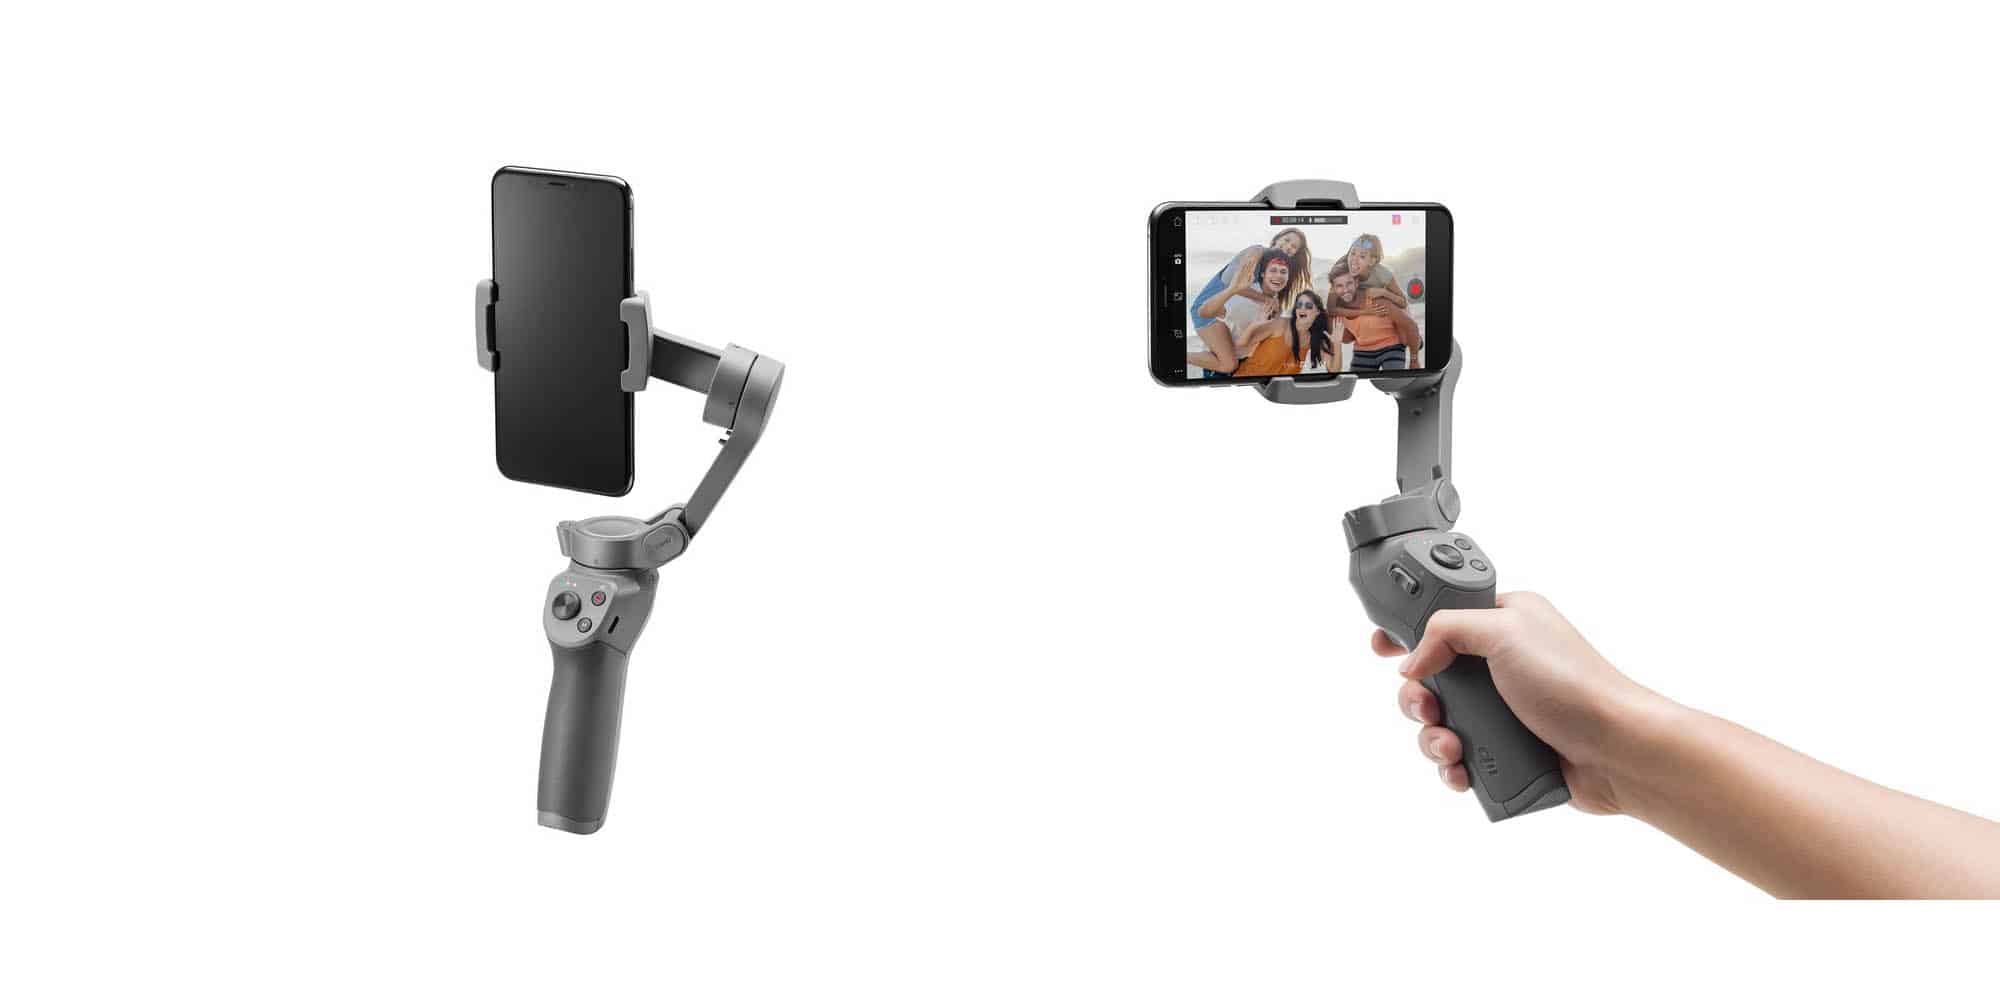 DJI Osmo Mobile 3 Review: Is The New Folding Design A Game Changer 